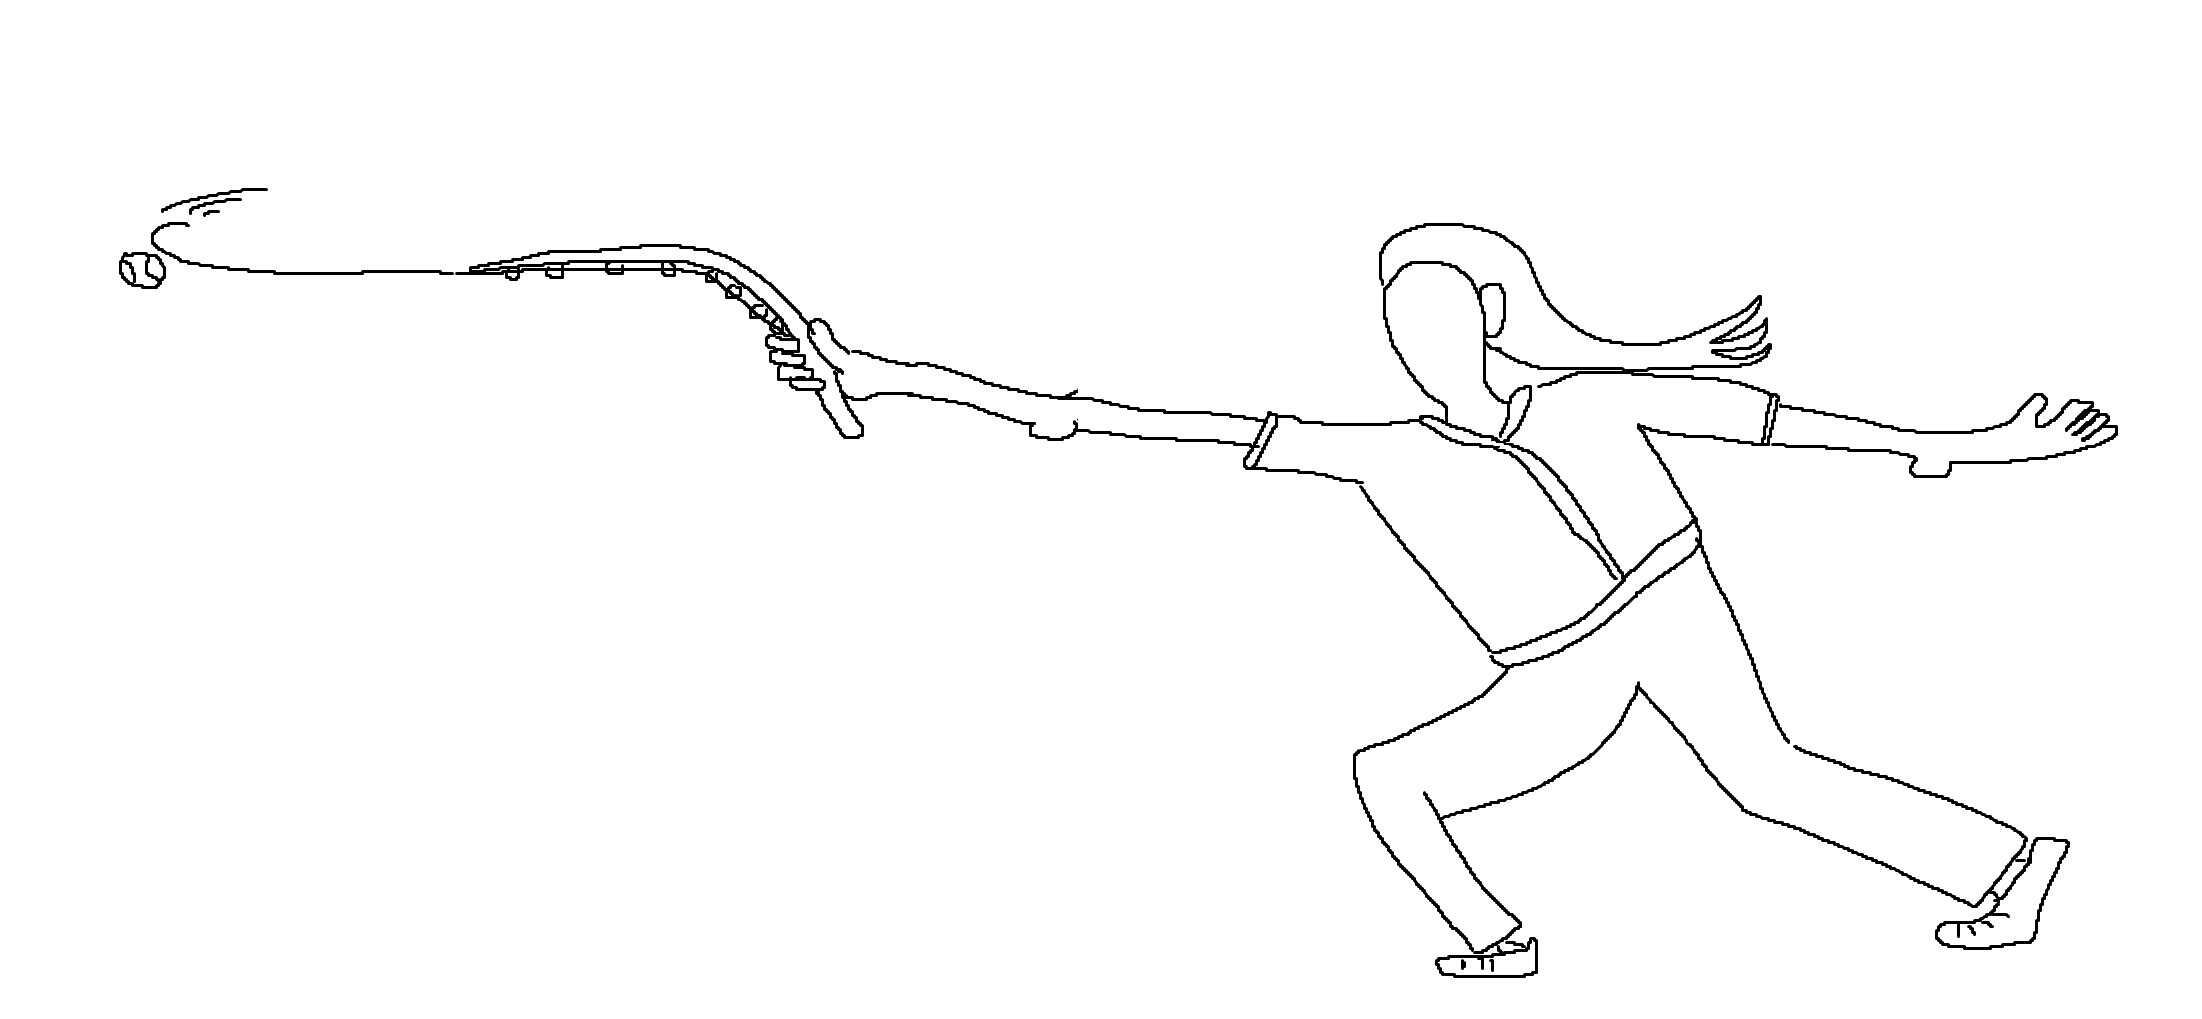 A faceless blaseball hero extends forth dramatically, whipping a ball out of the air with a fishing rod hook.